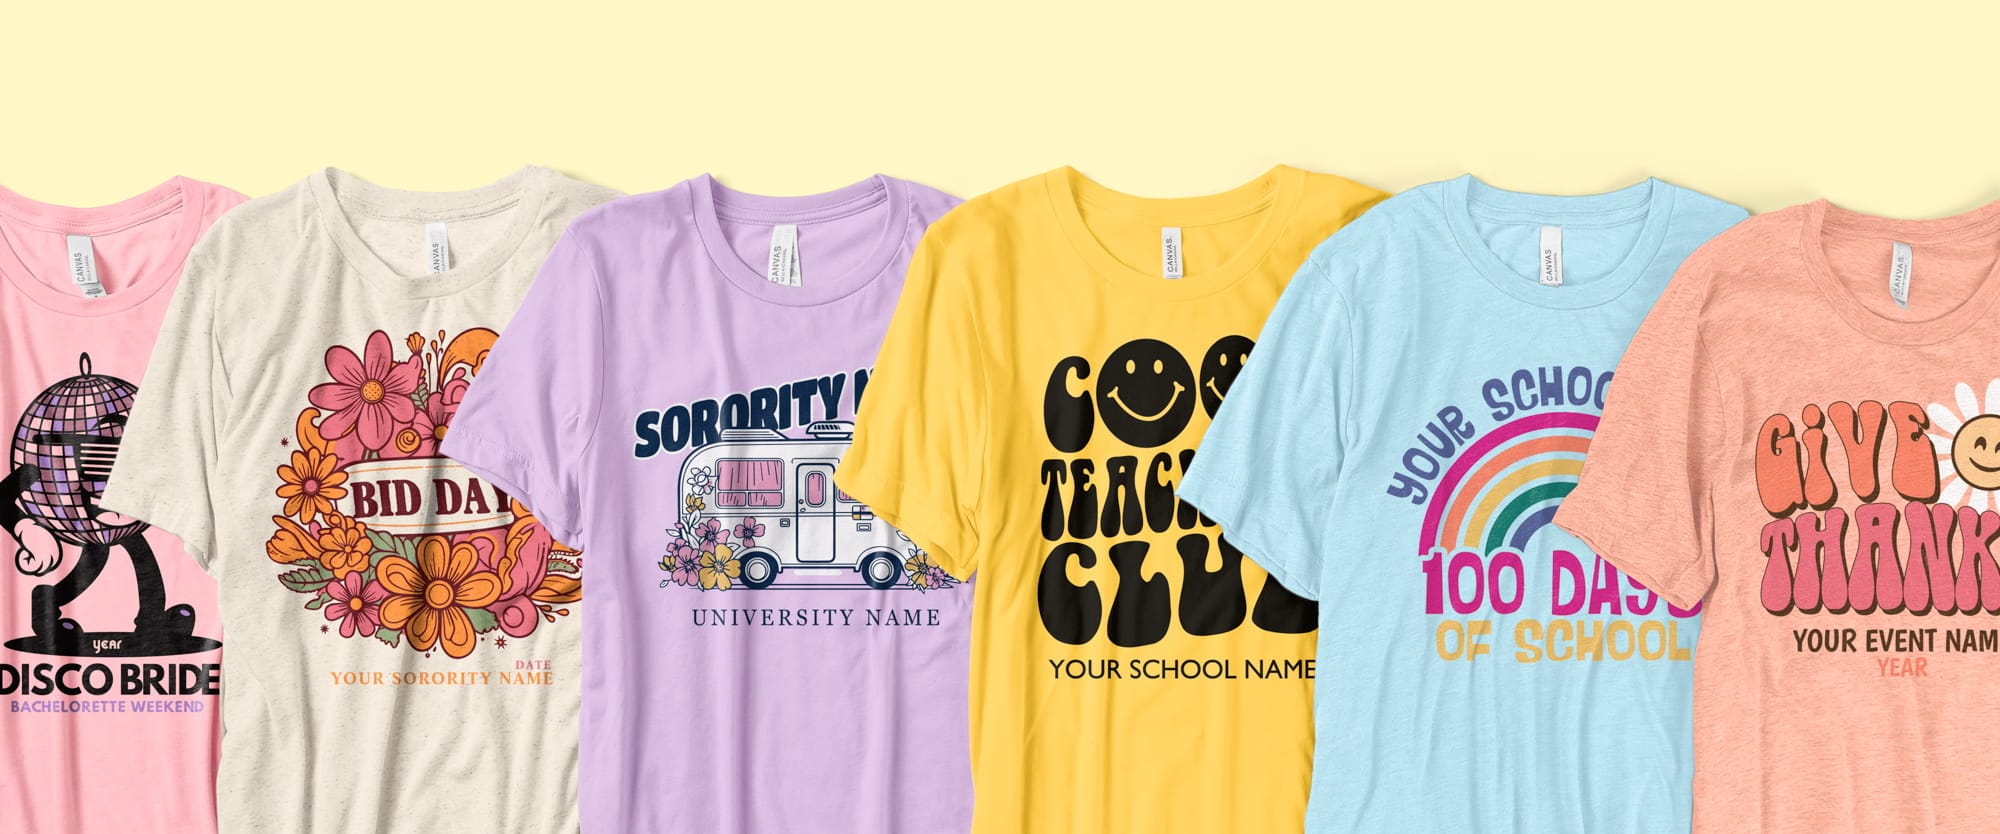 A lineup of t-shirts featuring a variety of groovy styled designs.